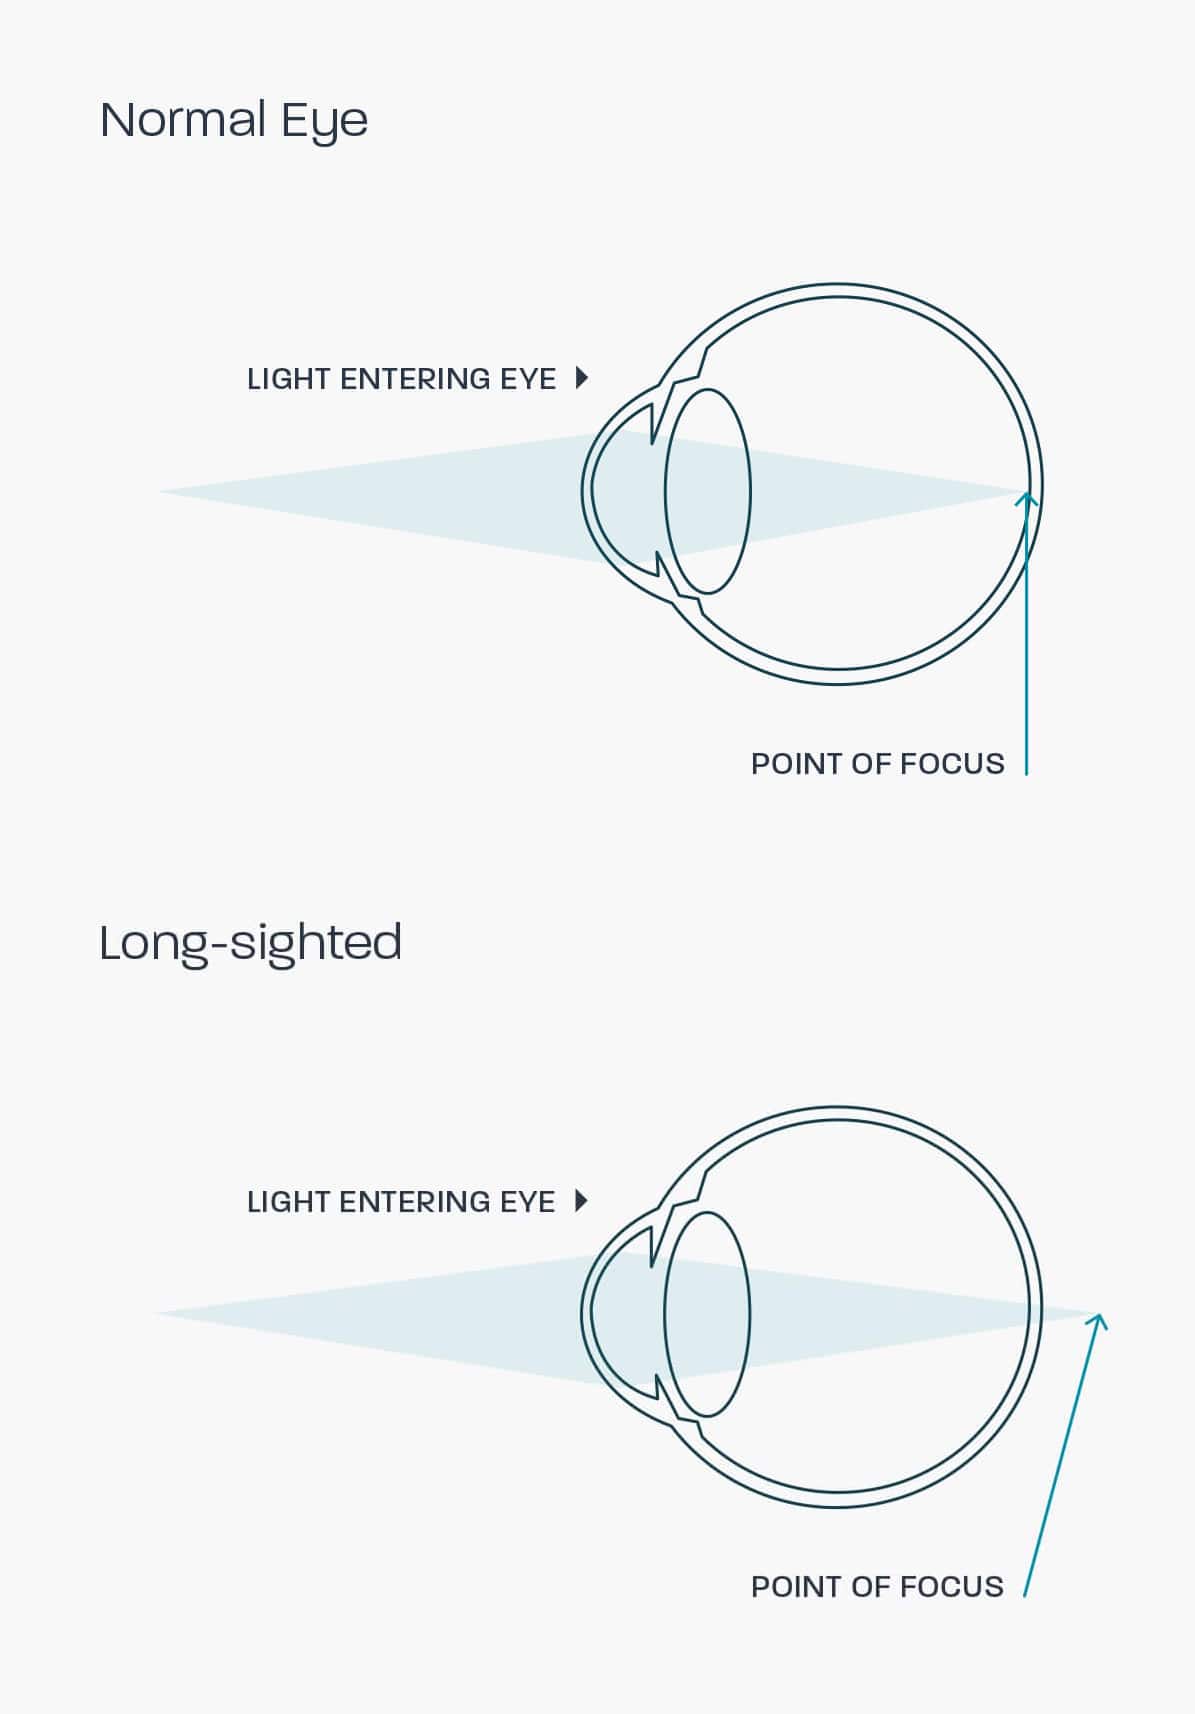 A graphic showing how a hyperopic eye works